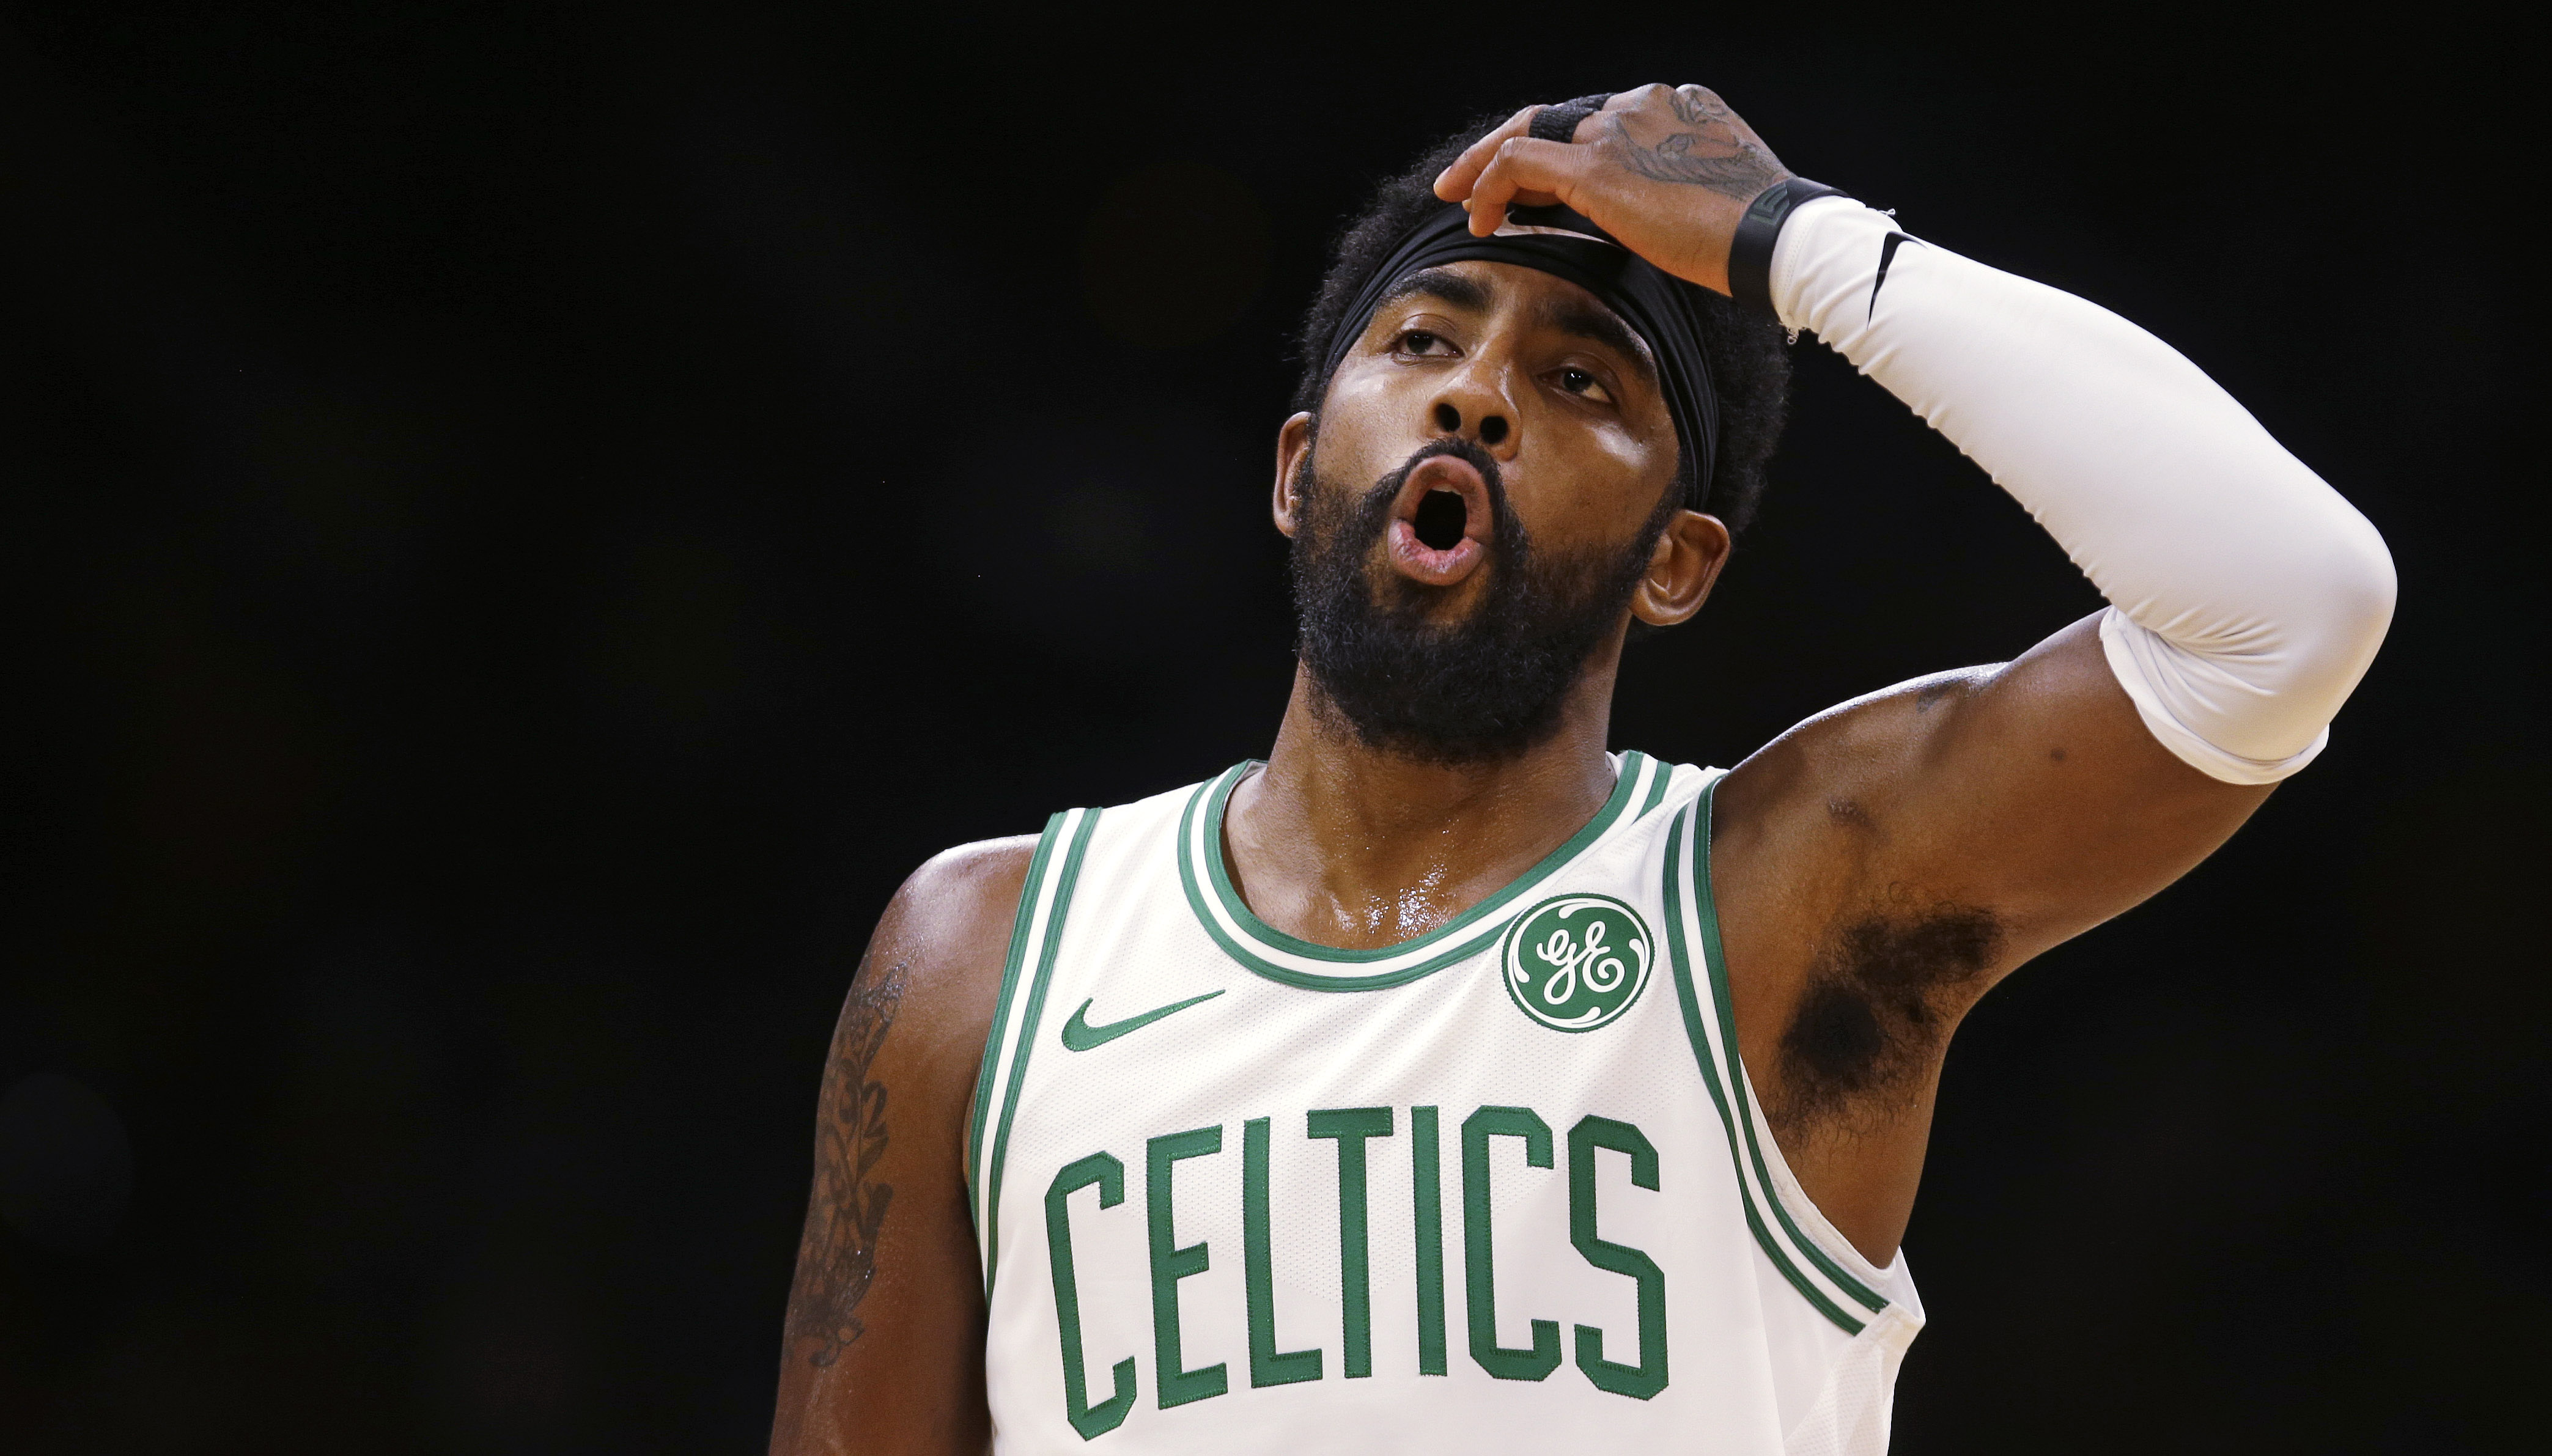 kyrie irving says the earth is flat